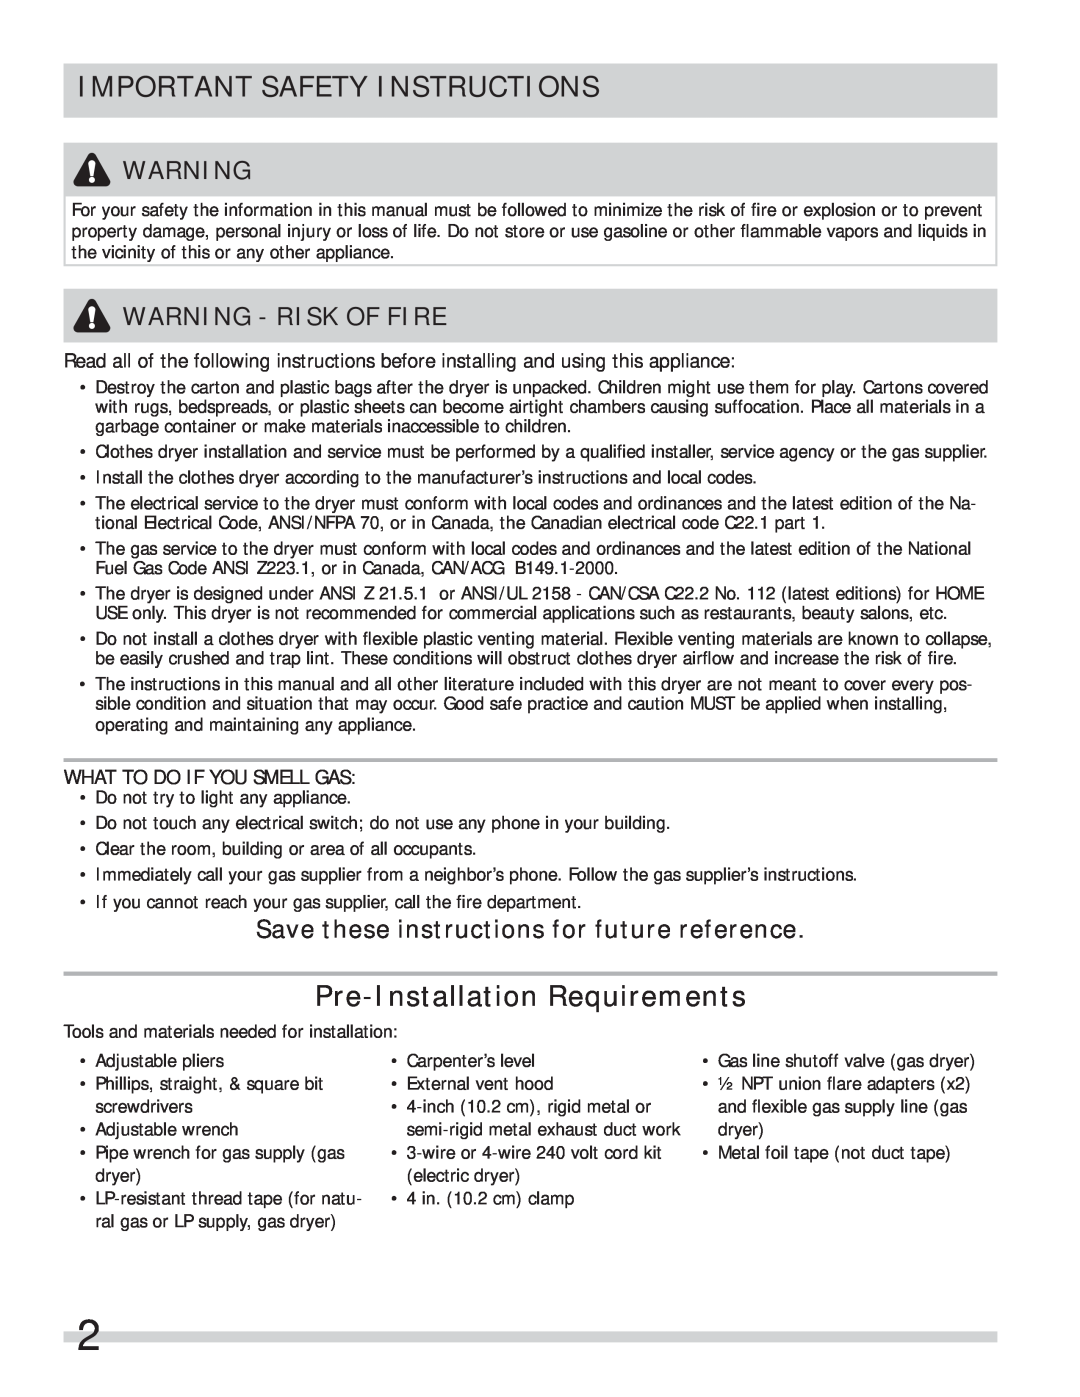 Frigidaire 137134900B Important Safety Instructions, Pre-Installation Requirements, Warning - Risk Of Fire 